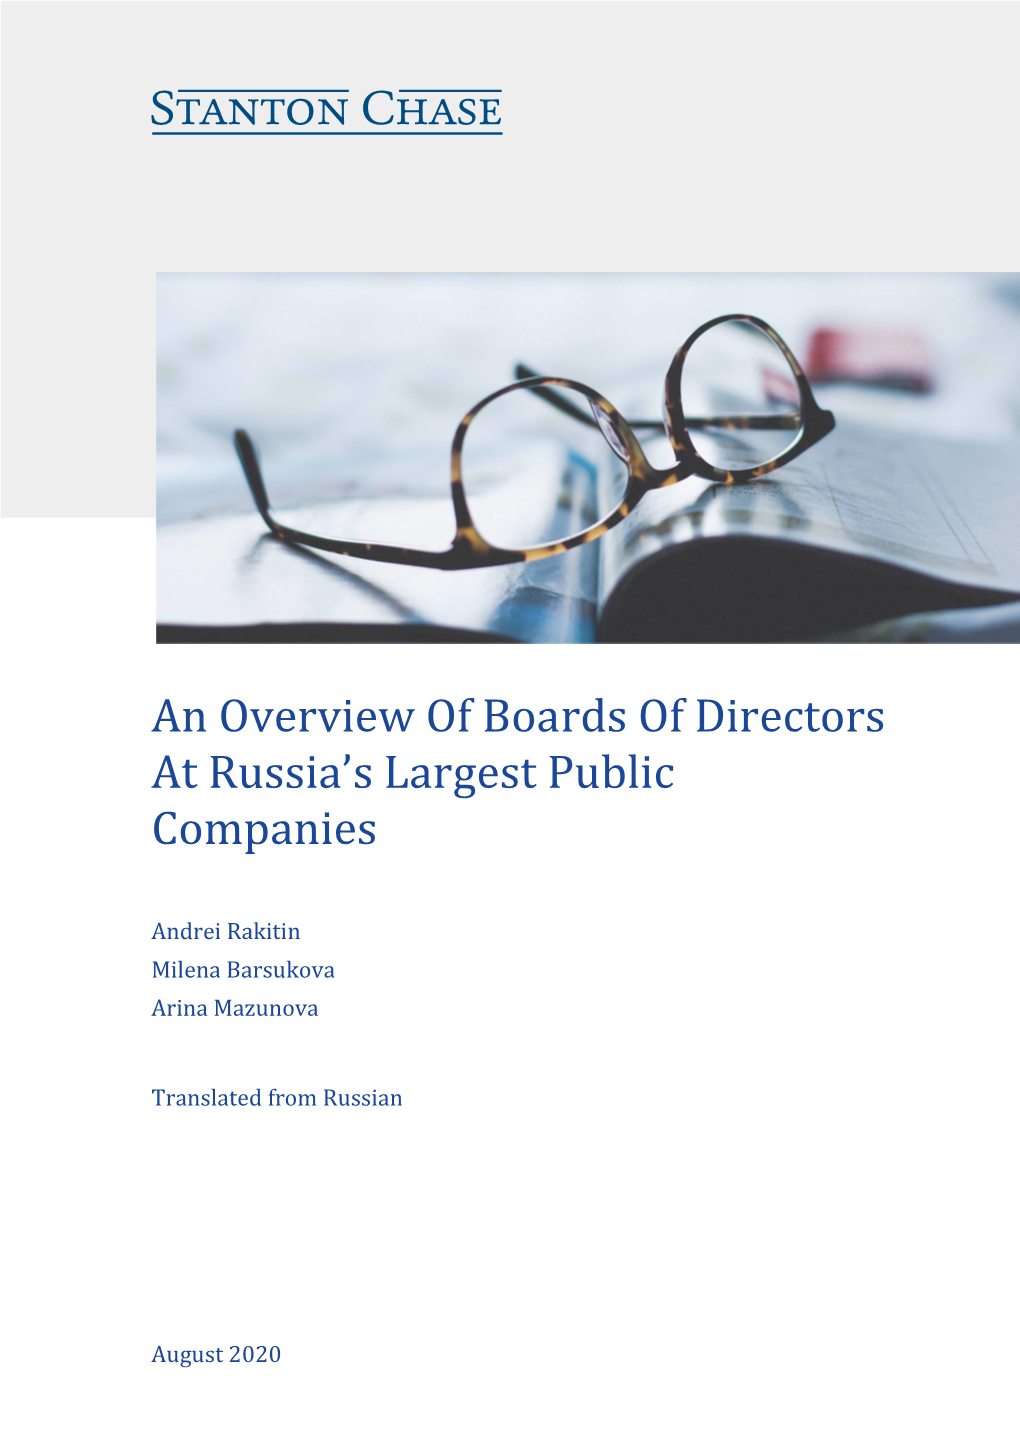 An Overview of Boards of Directors at Russia's Largest Public Companies